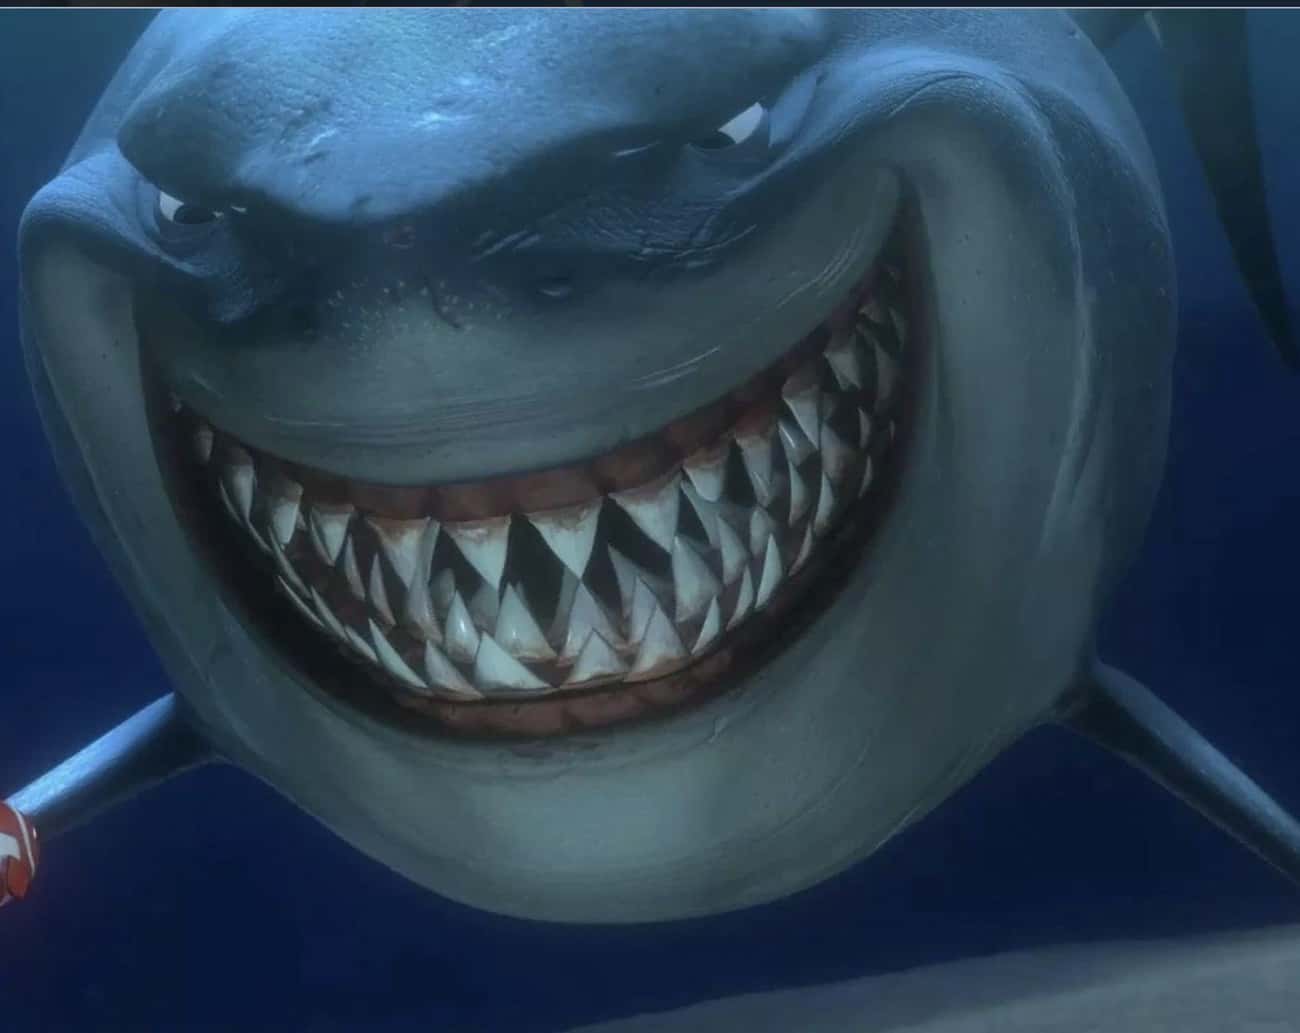 12 Accurate Scientific Details That Disney Movies Got Right - Sharks Do Have Rows of Teeth, Like Bruce in 'Finding Nemo'